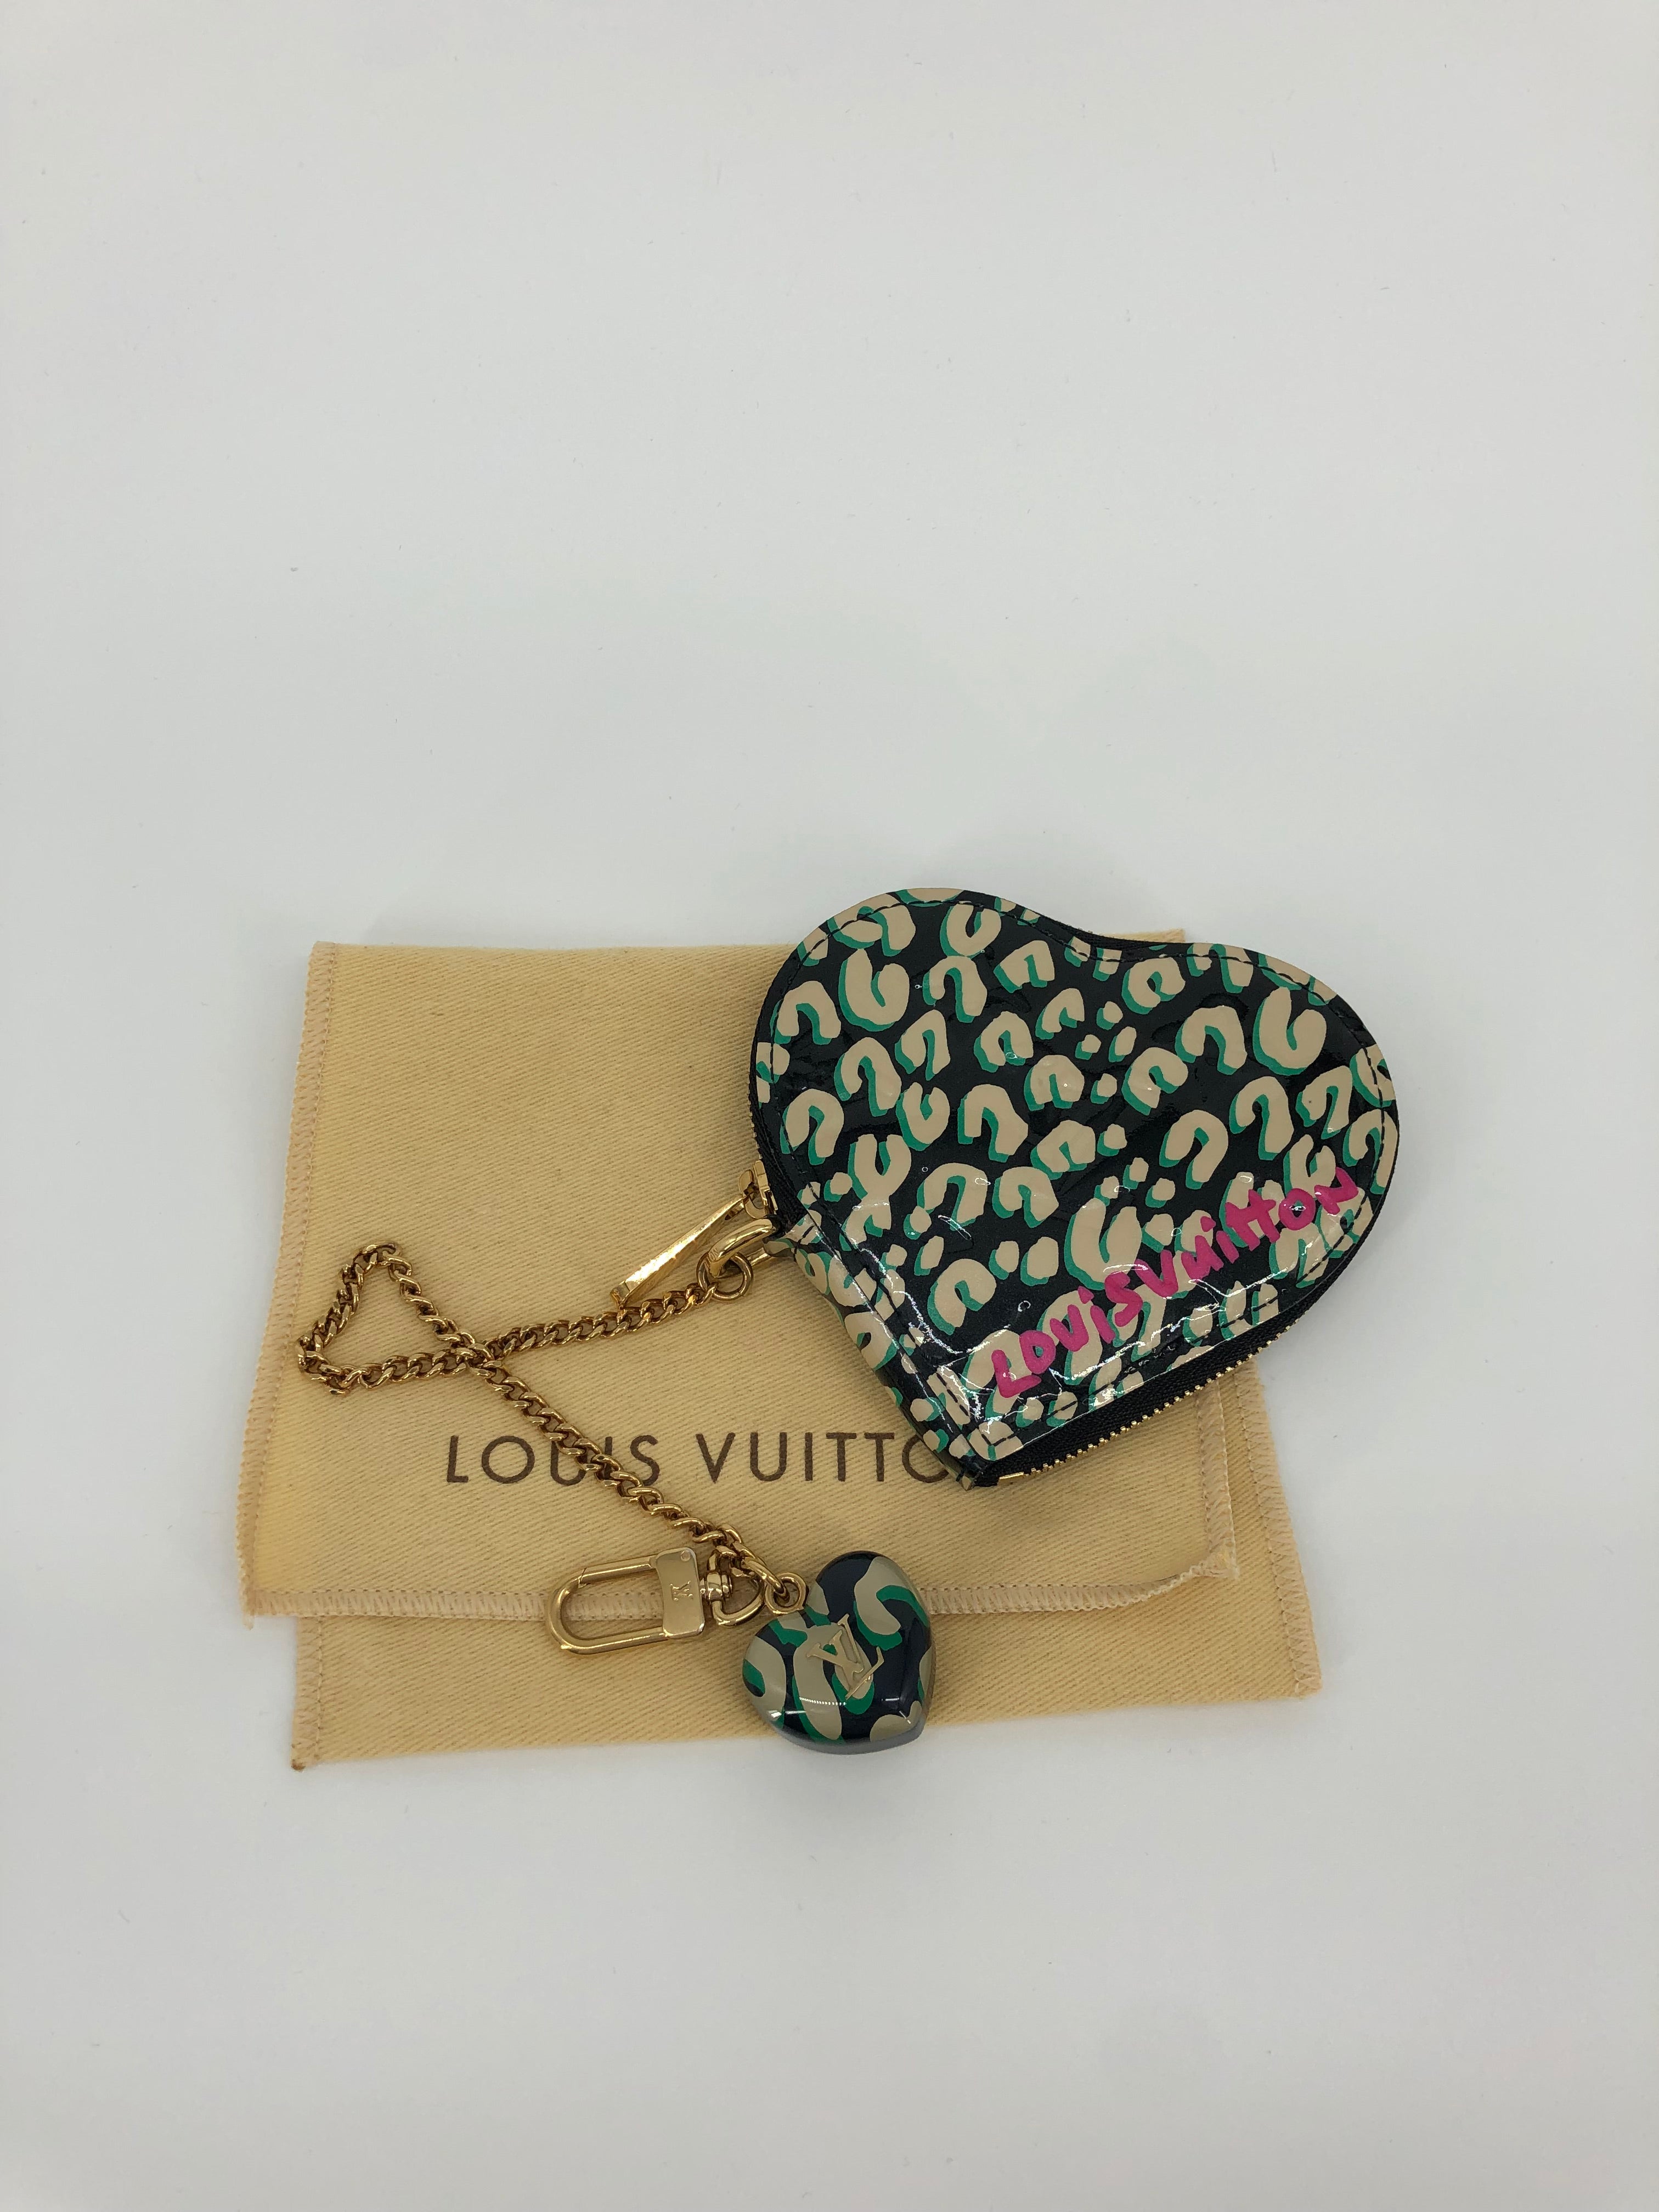 Authentic Louis Vuitton Stephen Sprouse Heart shaped coin purse